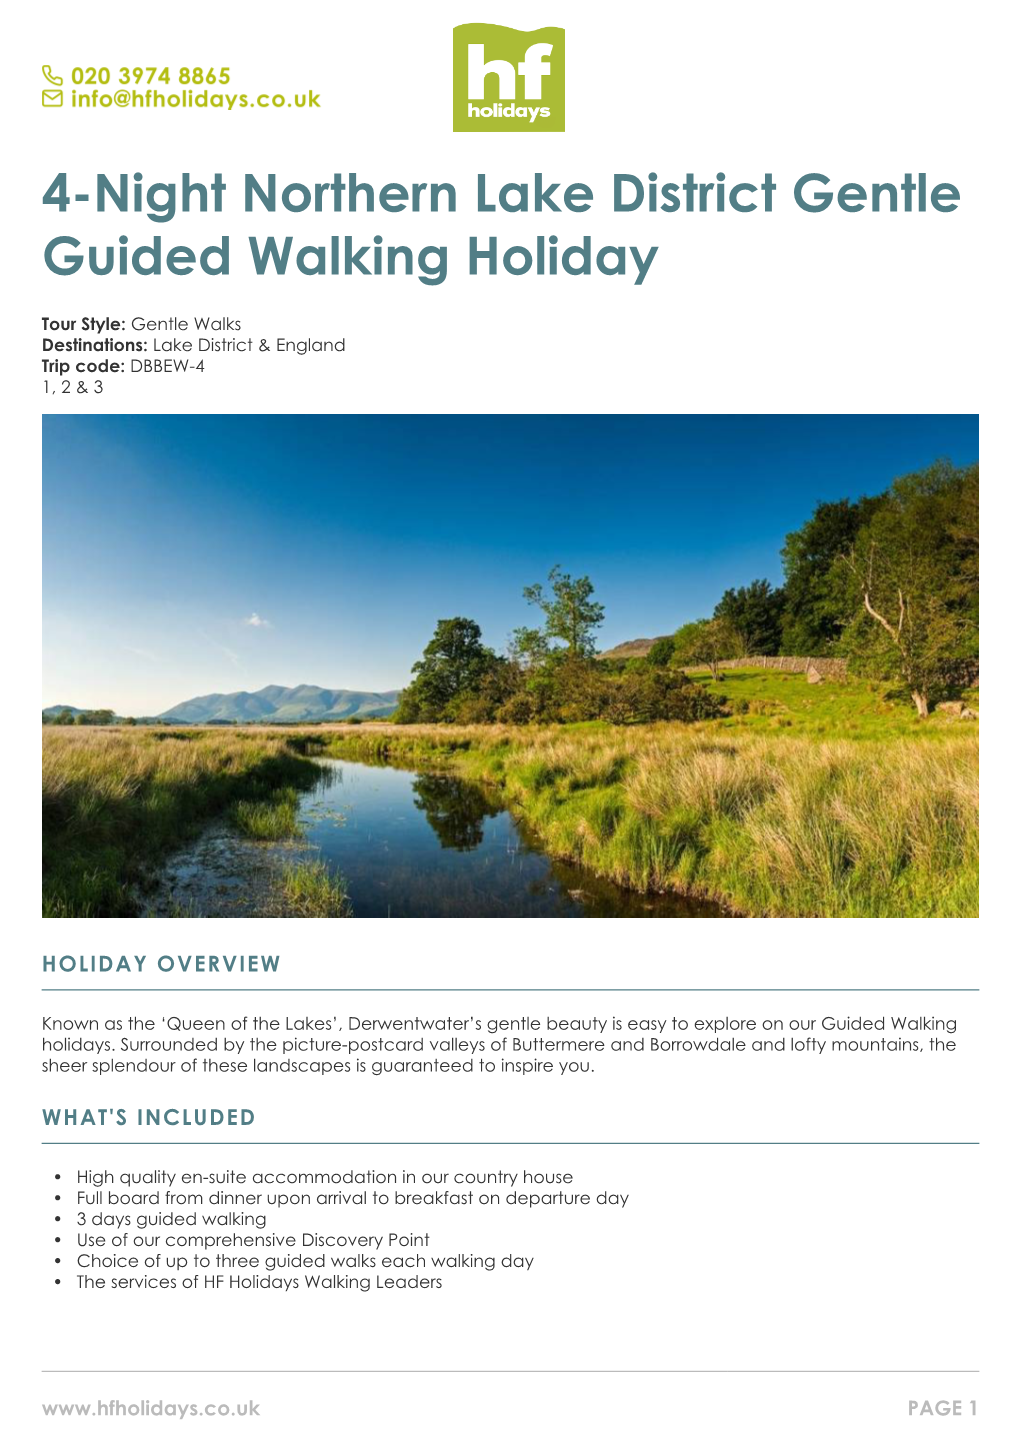 4-Night Northern Lake District Gentle Guided Walking Holiday